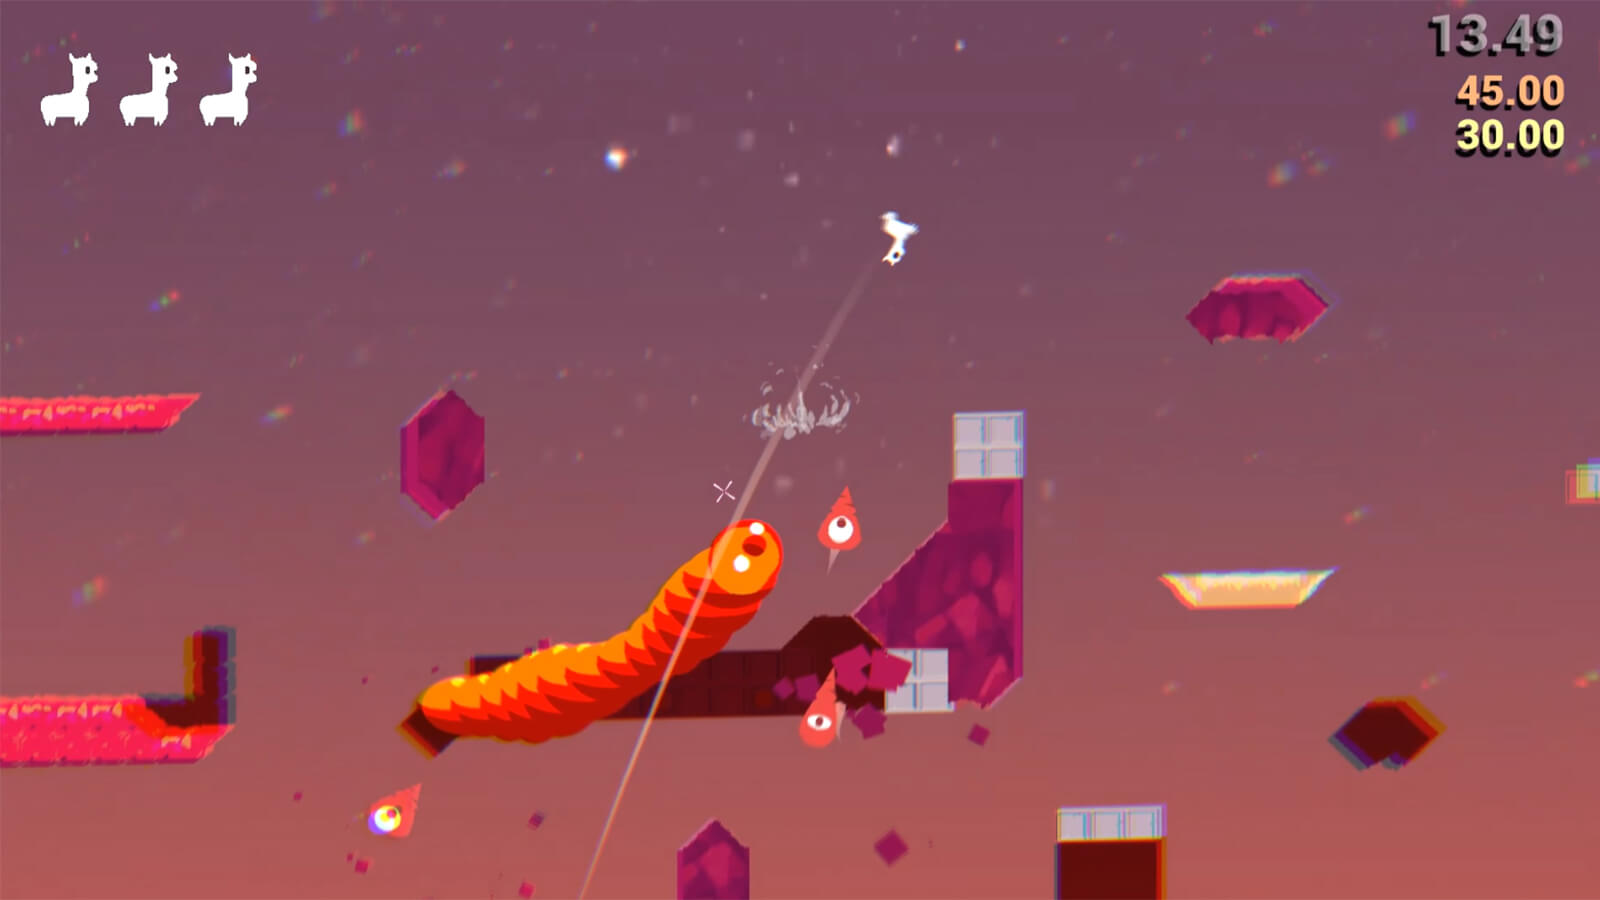 A small, white, two-dimensional alpaca flips through the air spitting at orange drill-shaped and worm-shaped enemies.